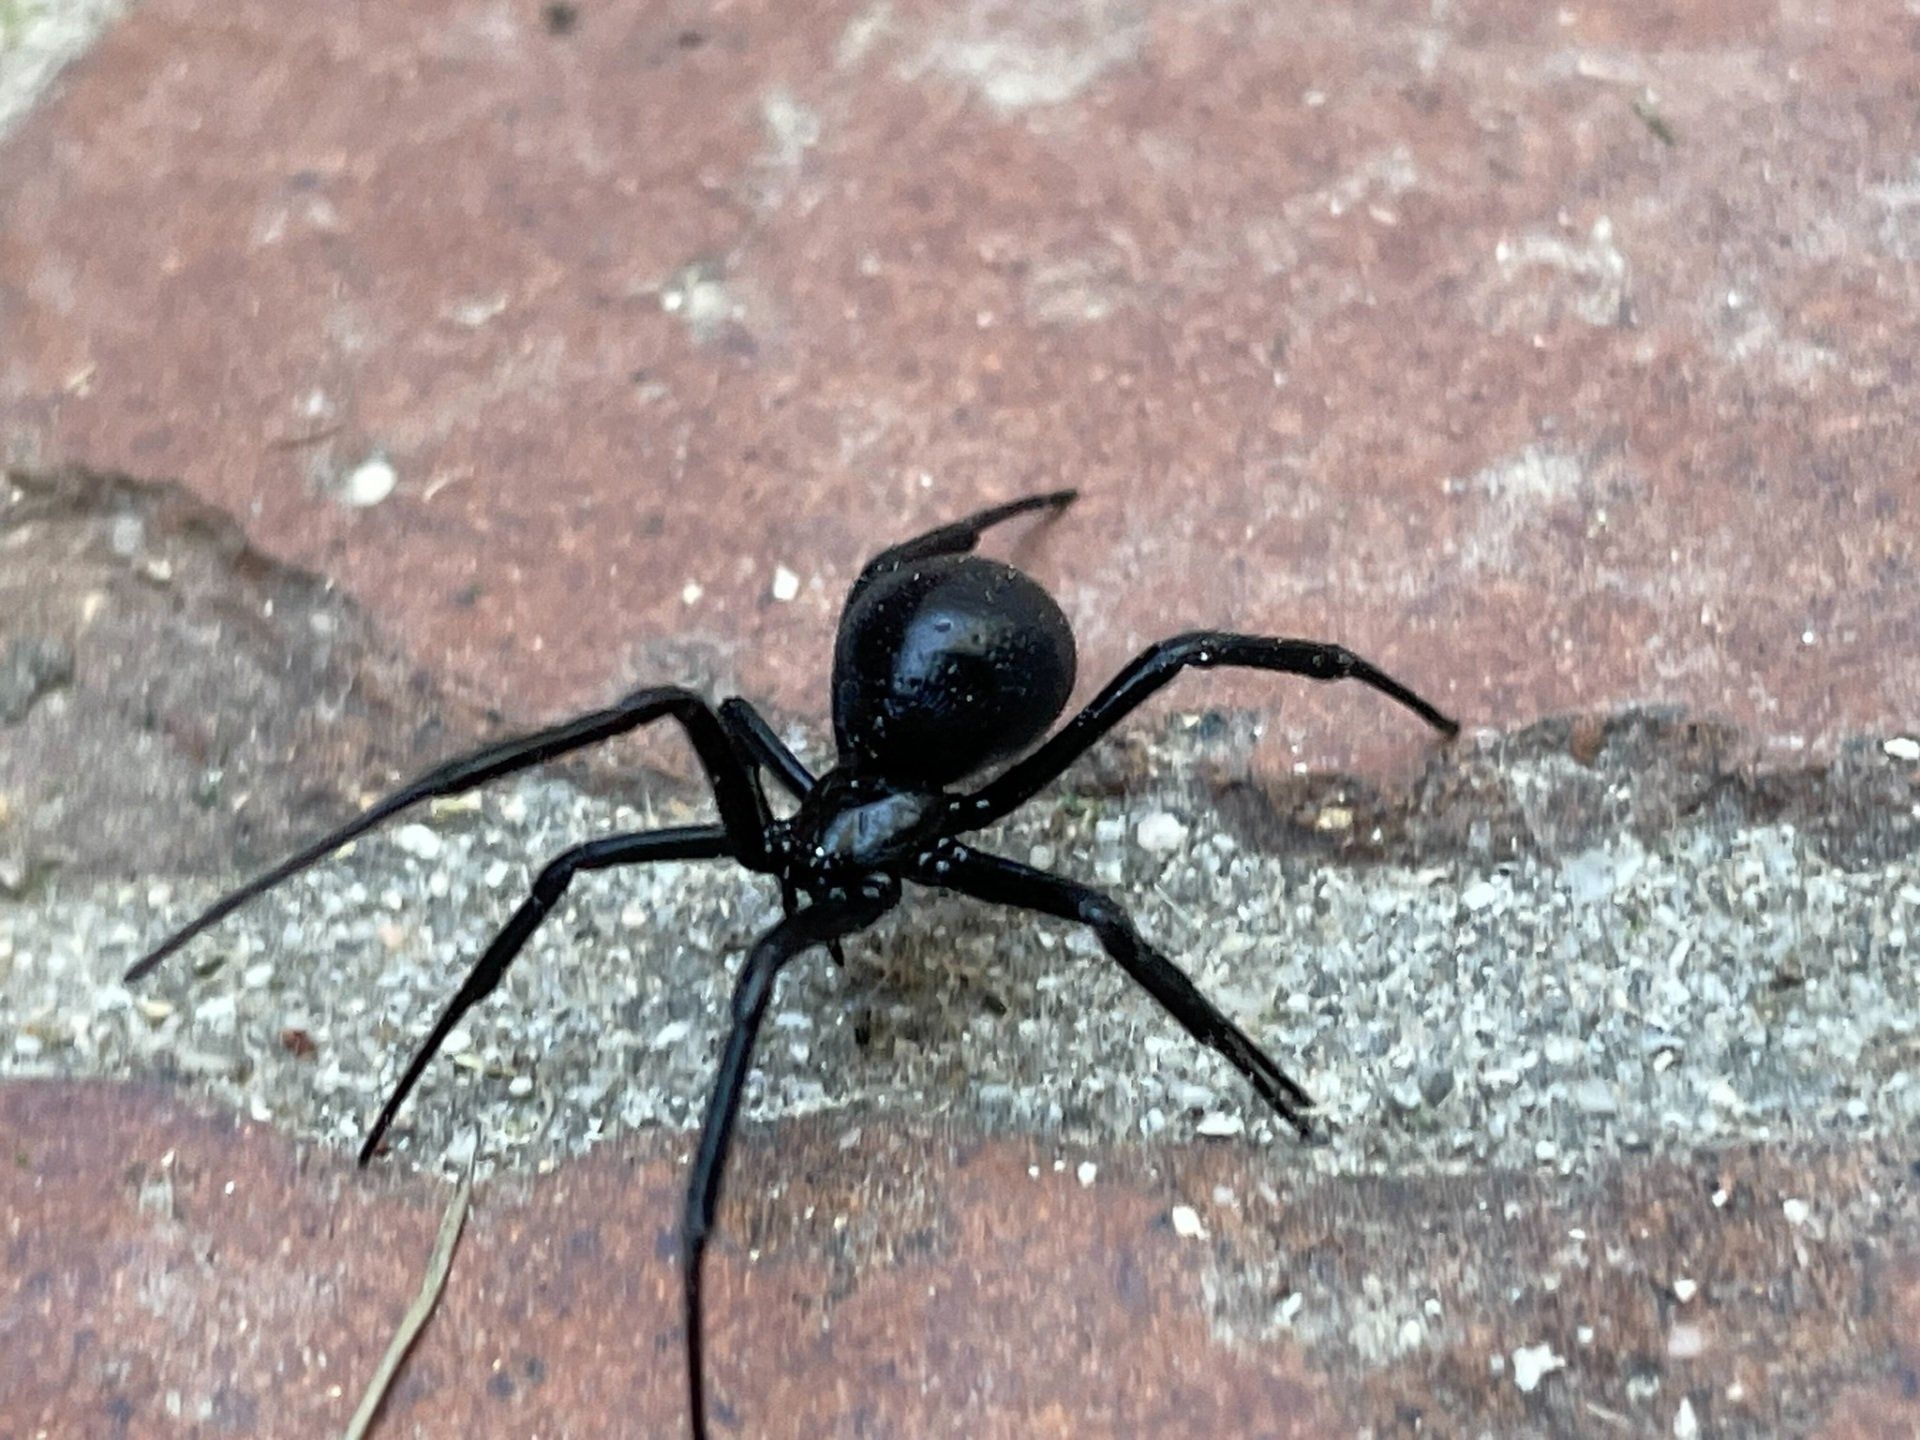 Which one of these spiders is a black widow?